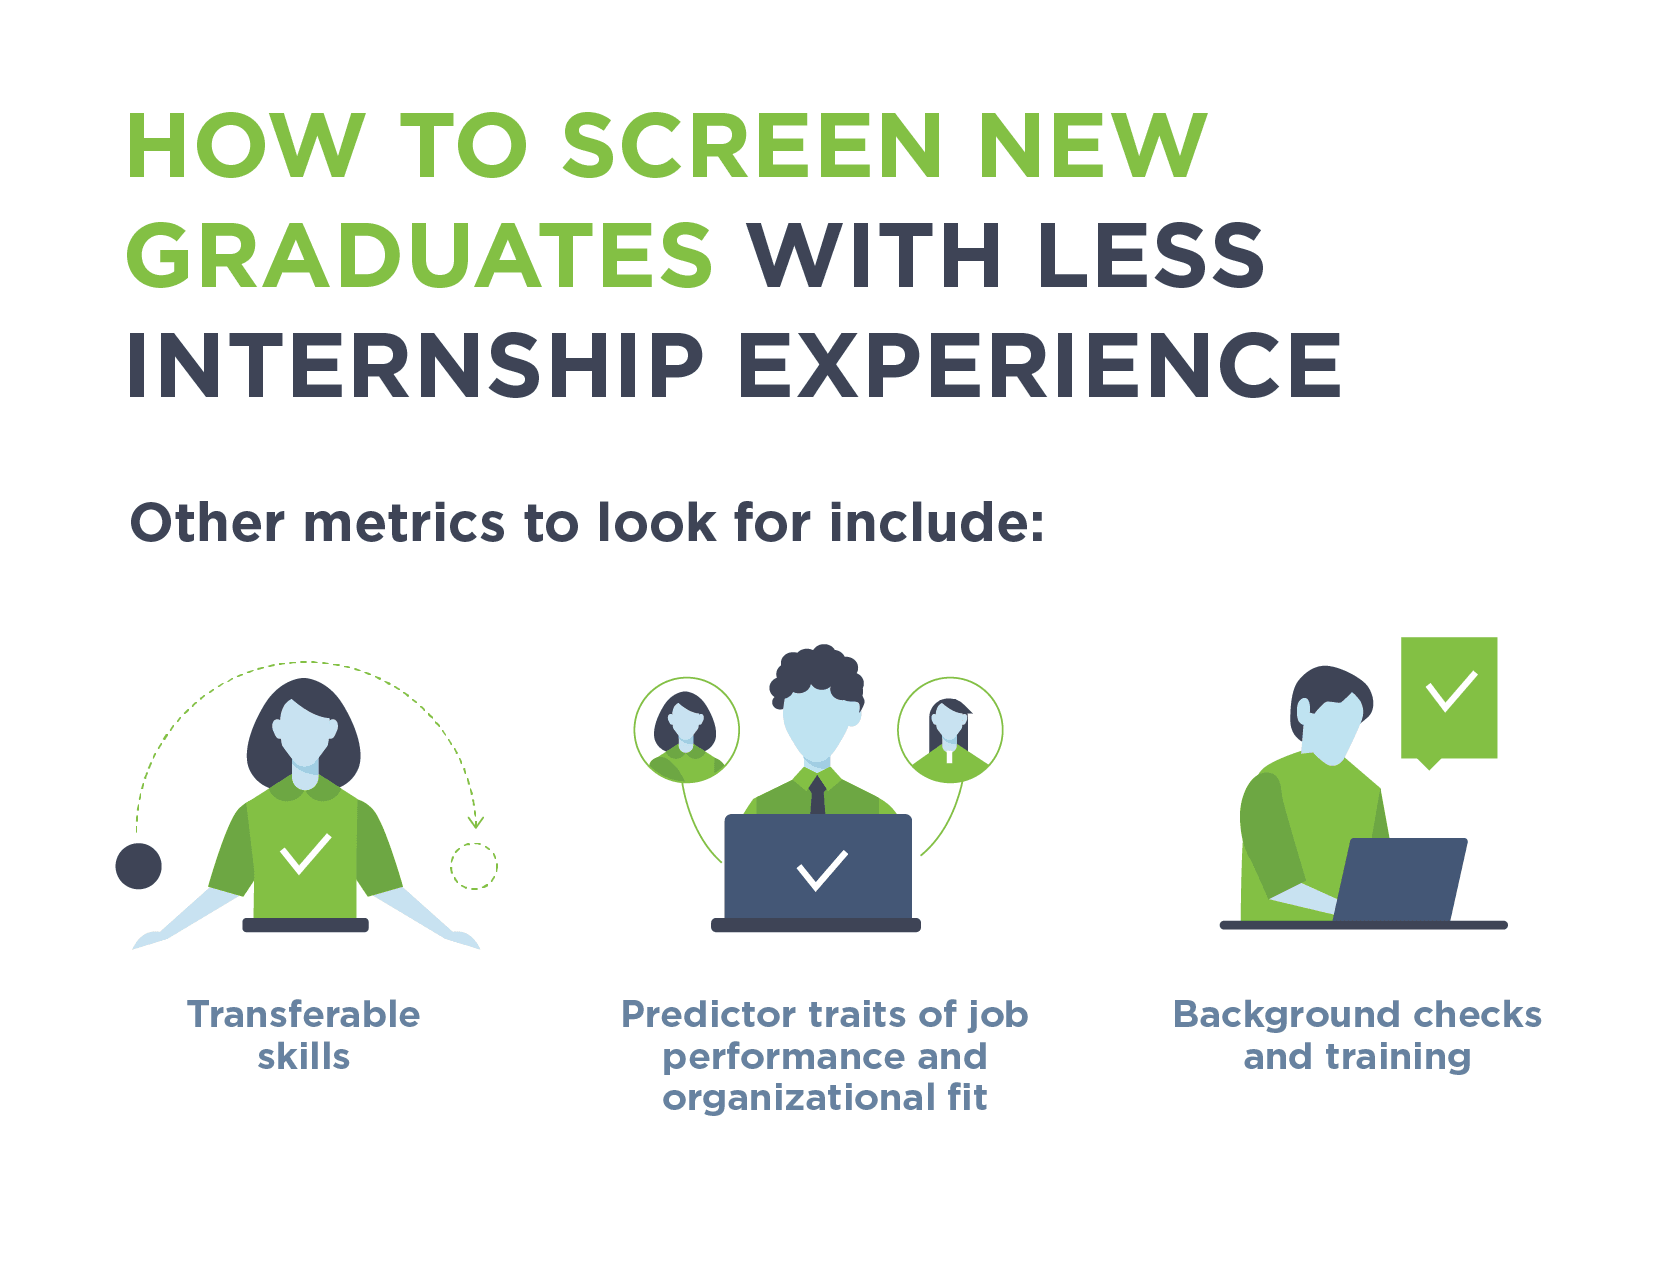 Tips for screening graduates with less internship experience.